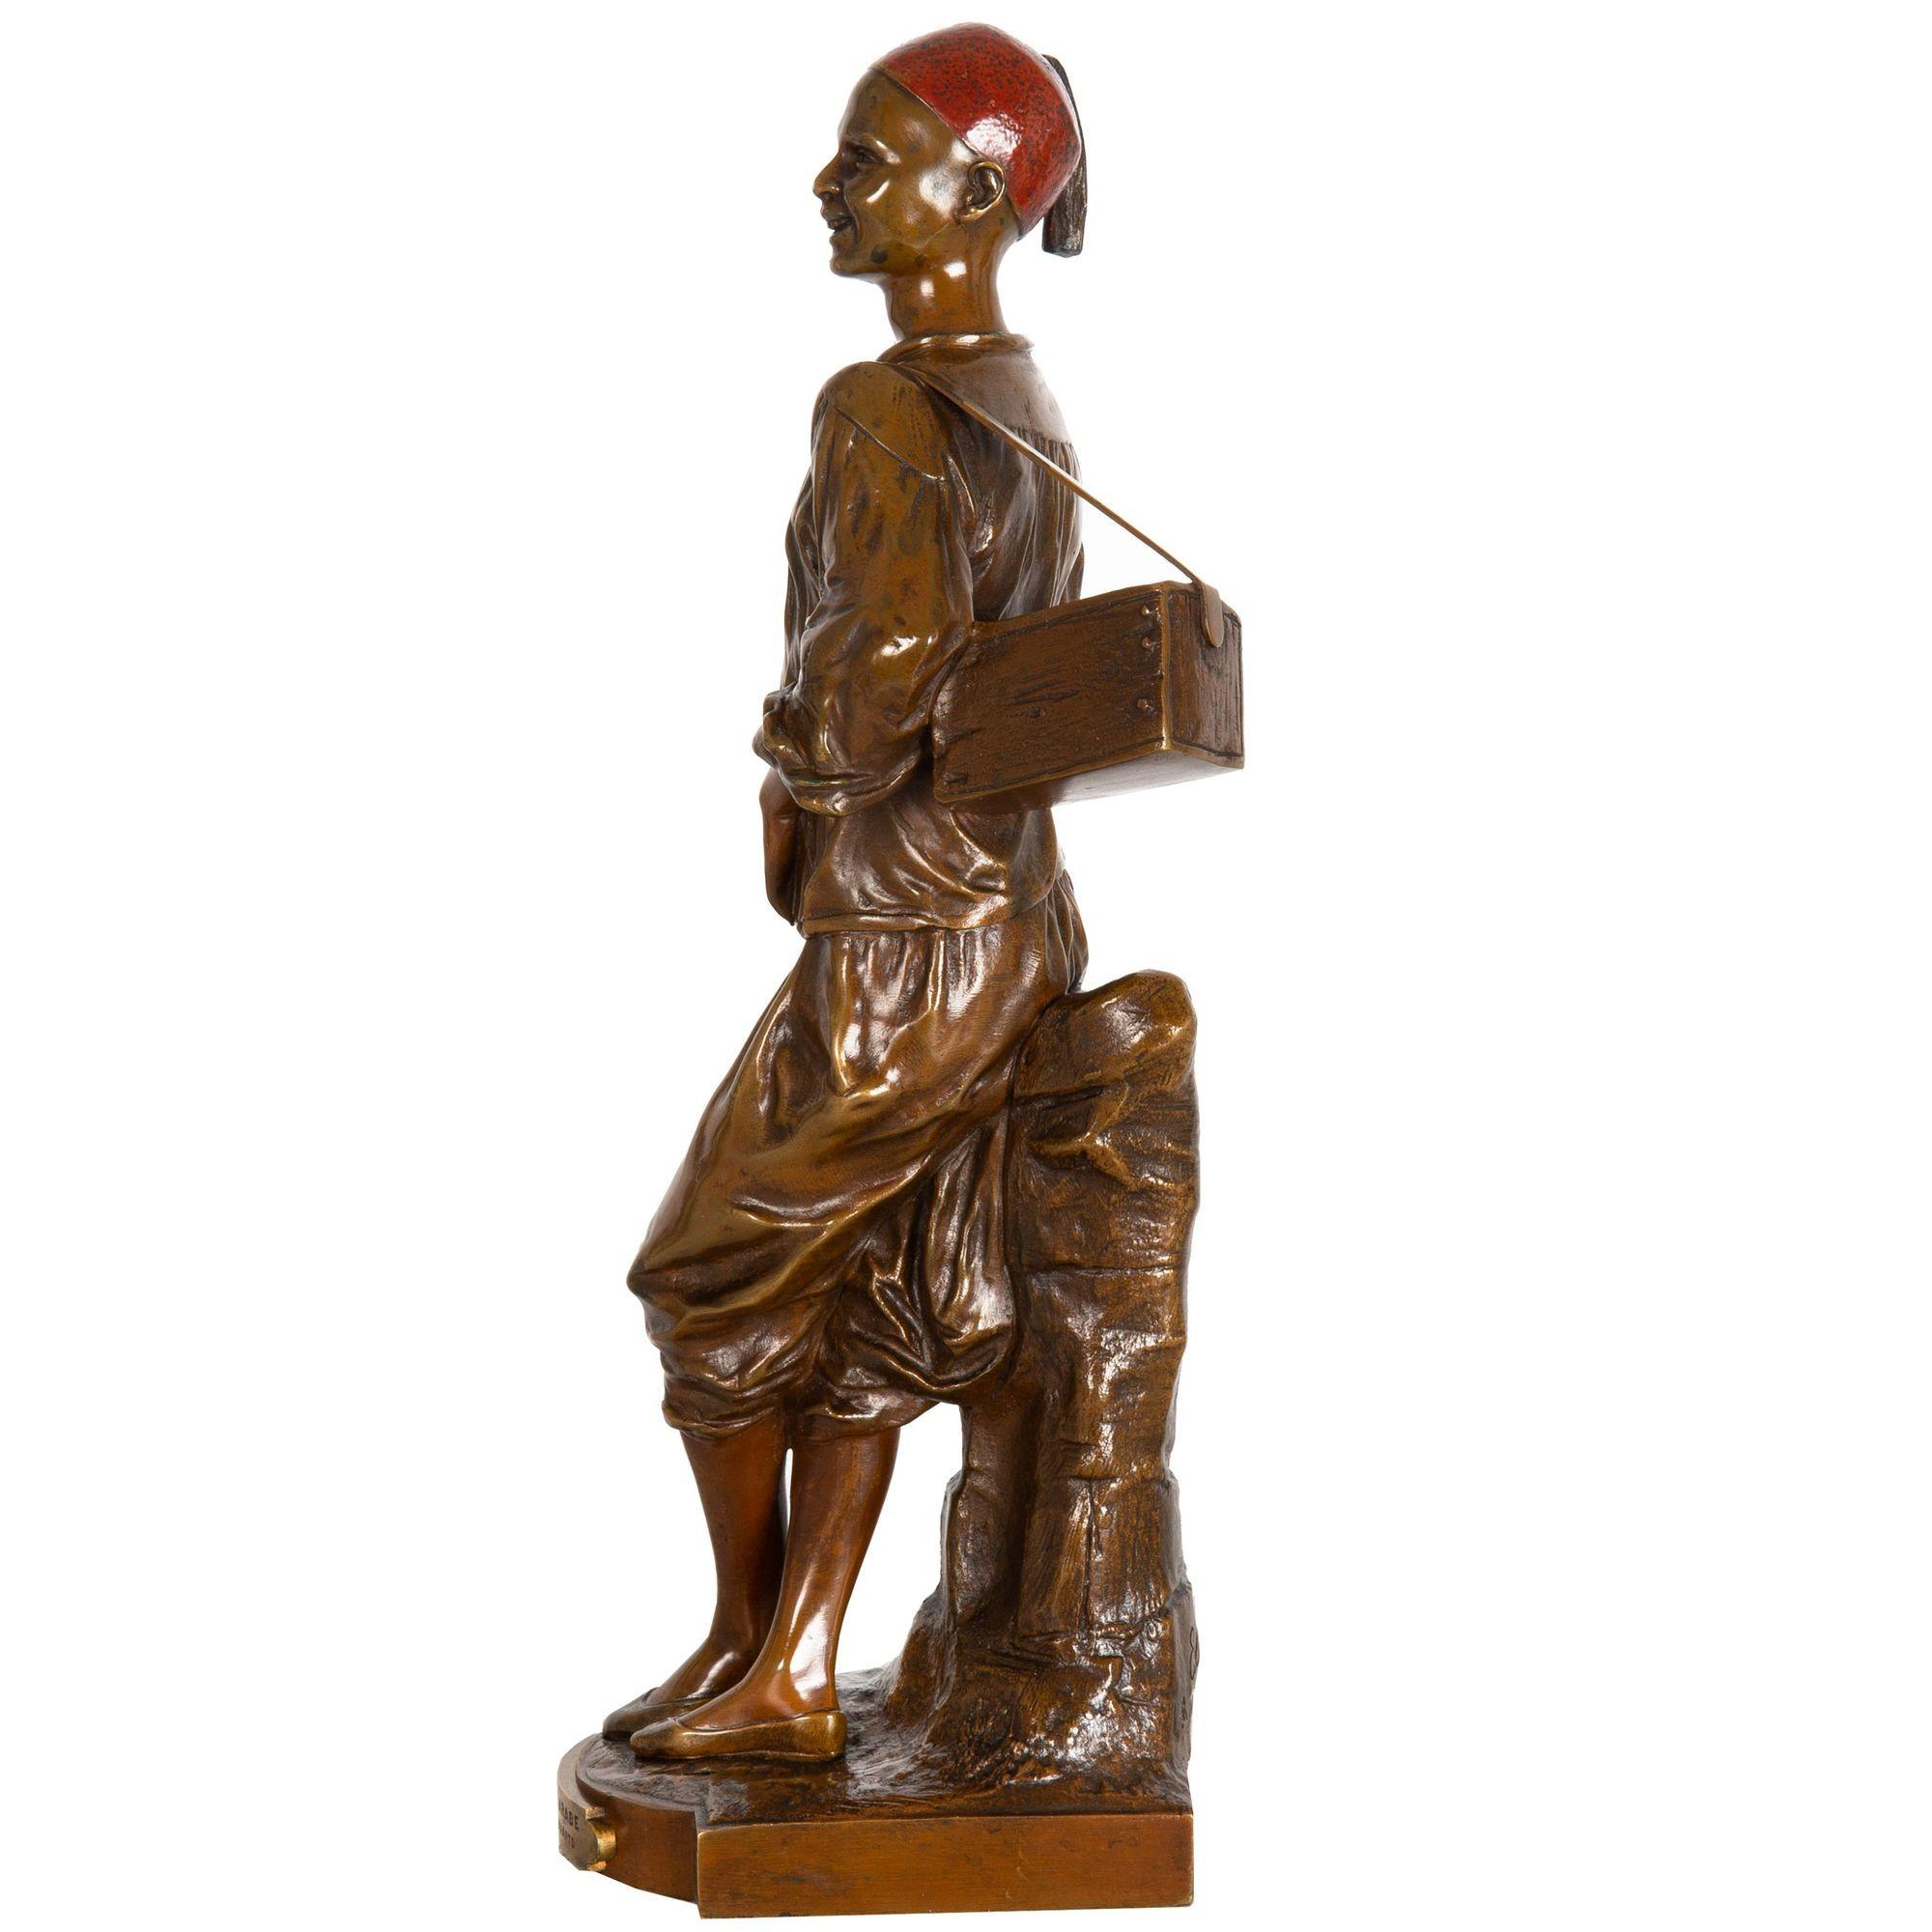 Polychromed French Orientalist Bronze Sculpture “Arab Shoeshine” after Edouard Drouot For Sale